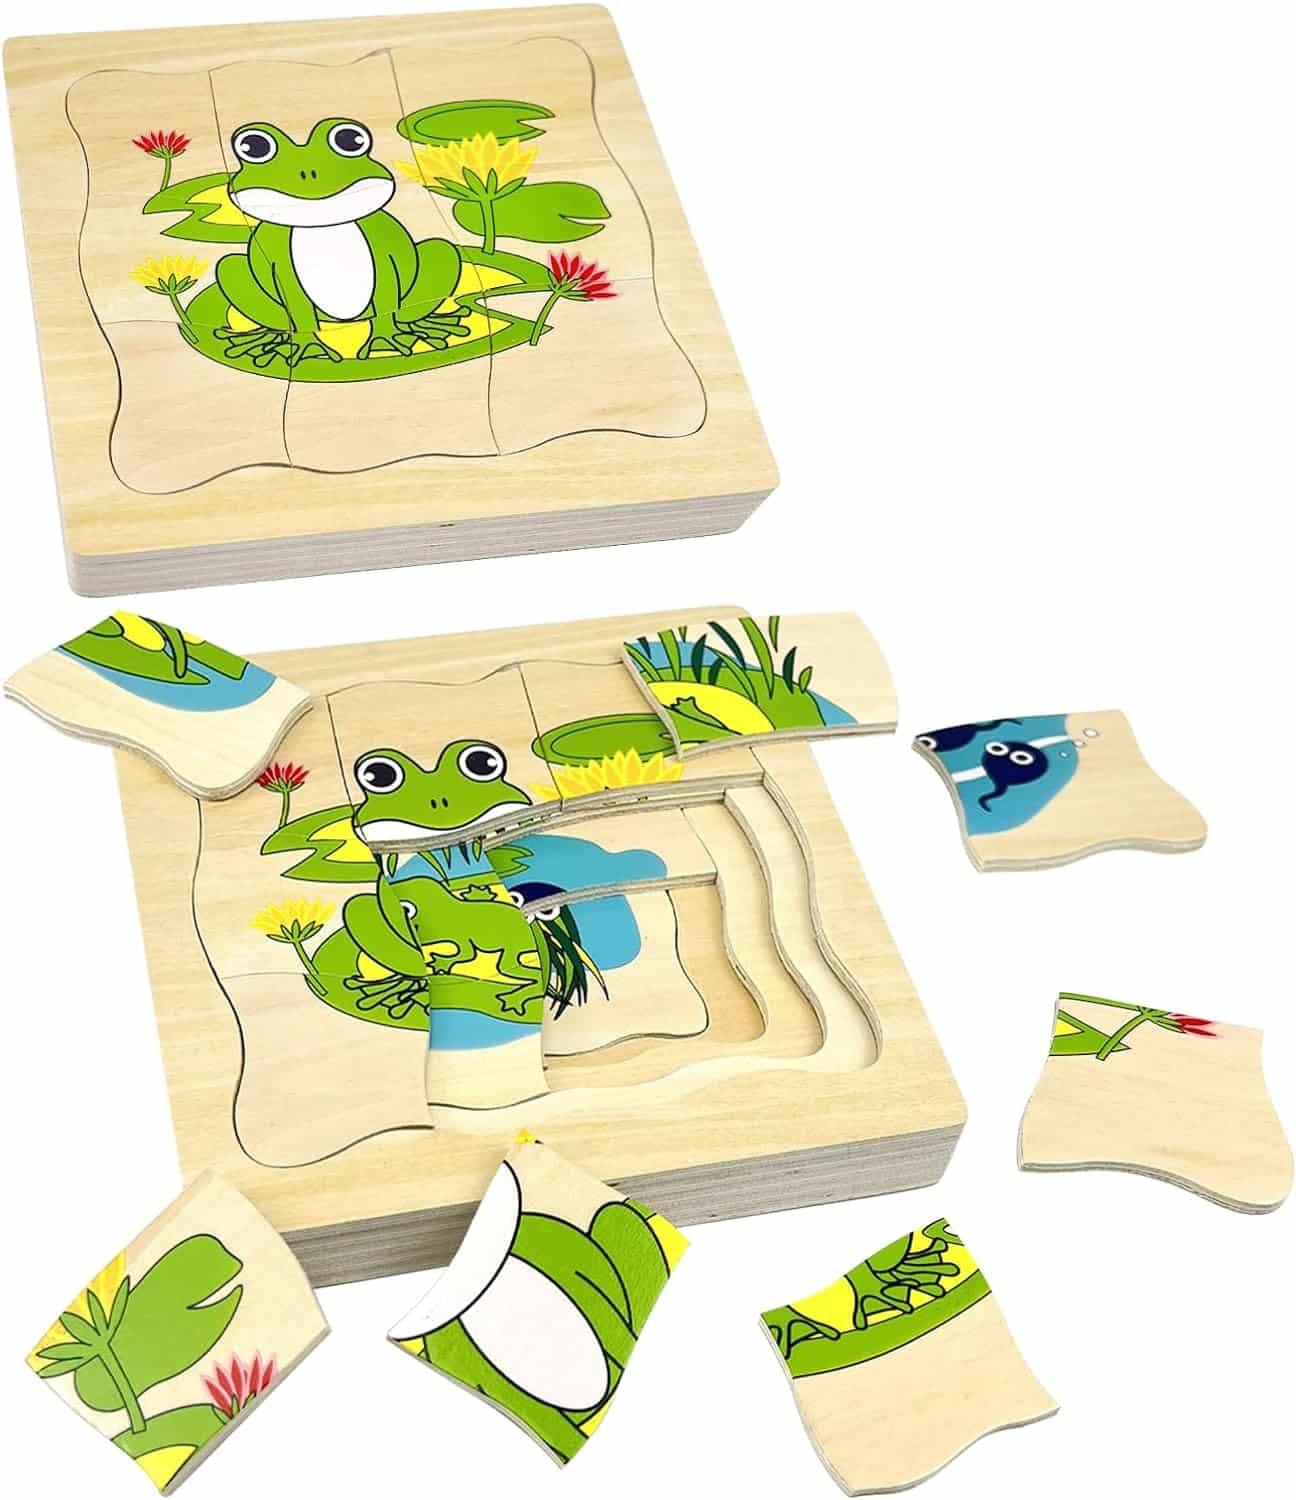 Montessori Wooden Puzzles for Kids Ages 4-8, 4 Layer Life Cycle Jigsaw Puzzle for Toddlers, Children Preschool Learning Educational Puzzles Toys for Boys and Girls (Frog)